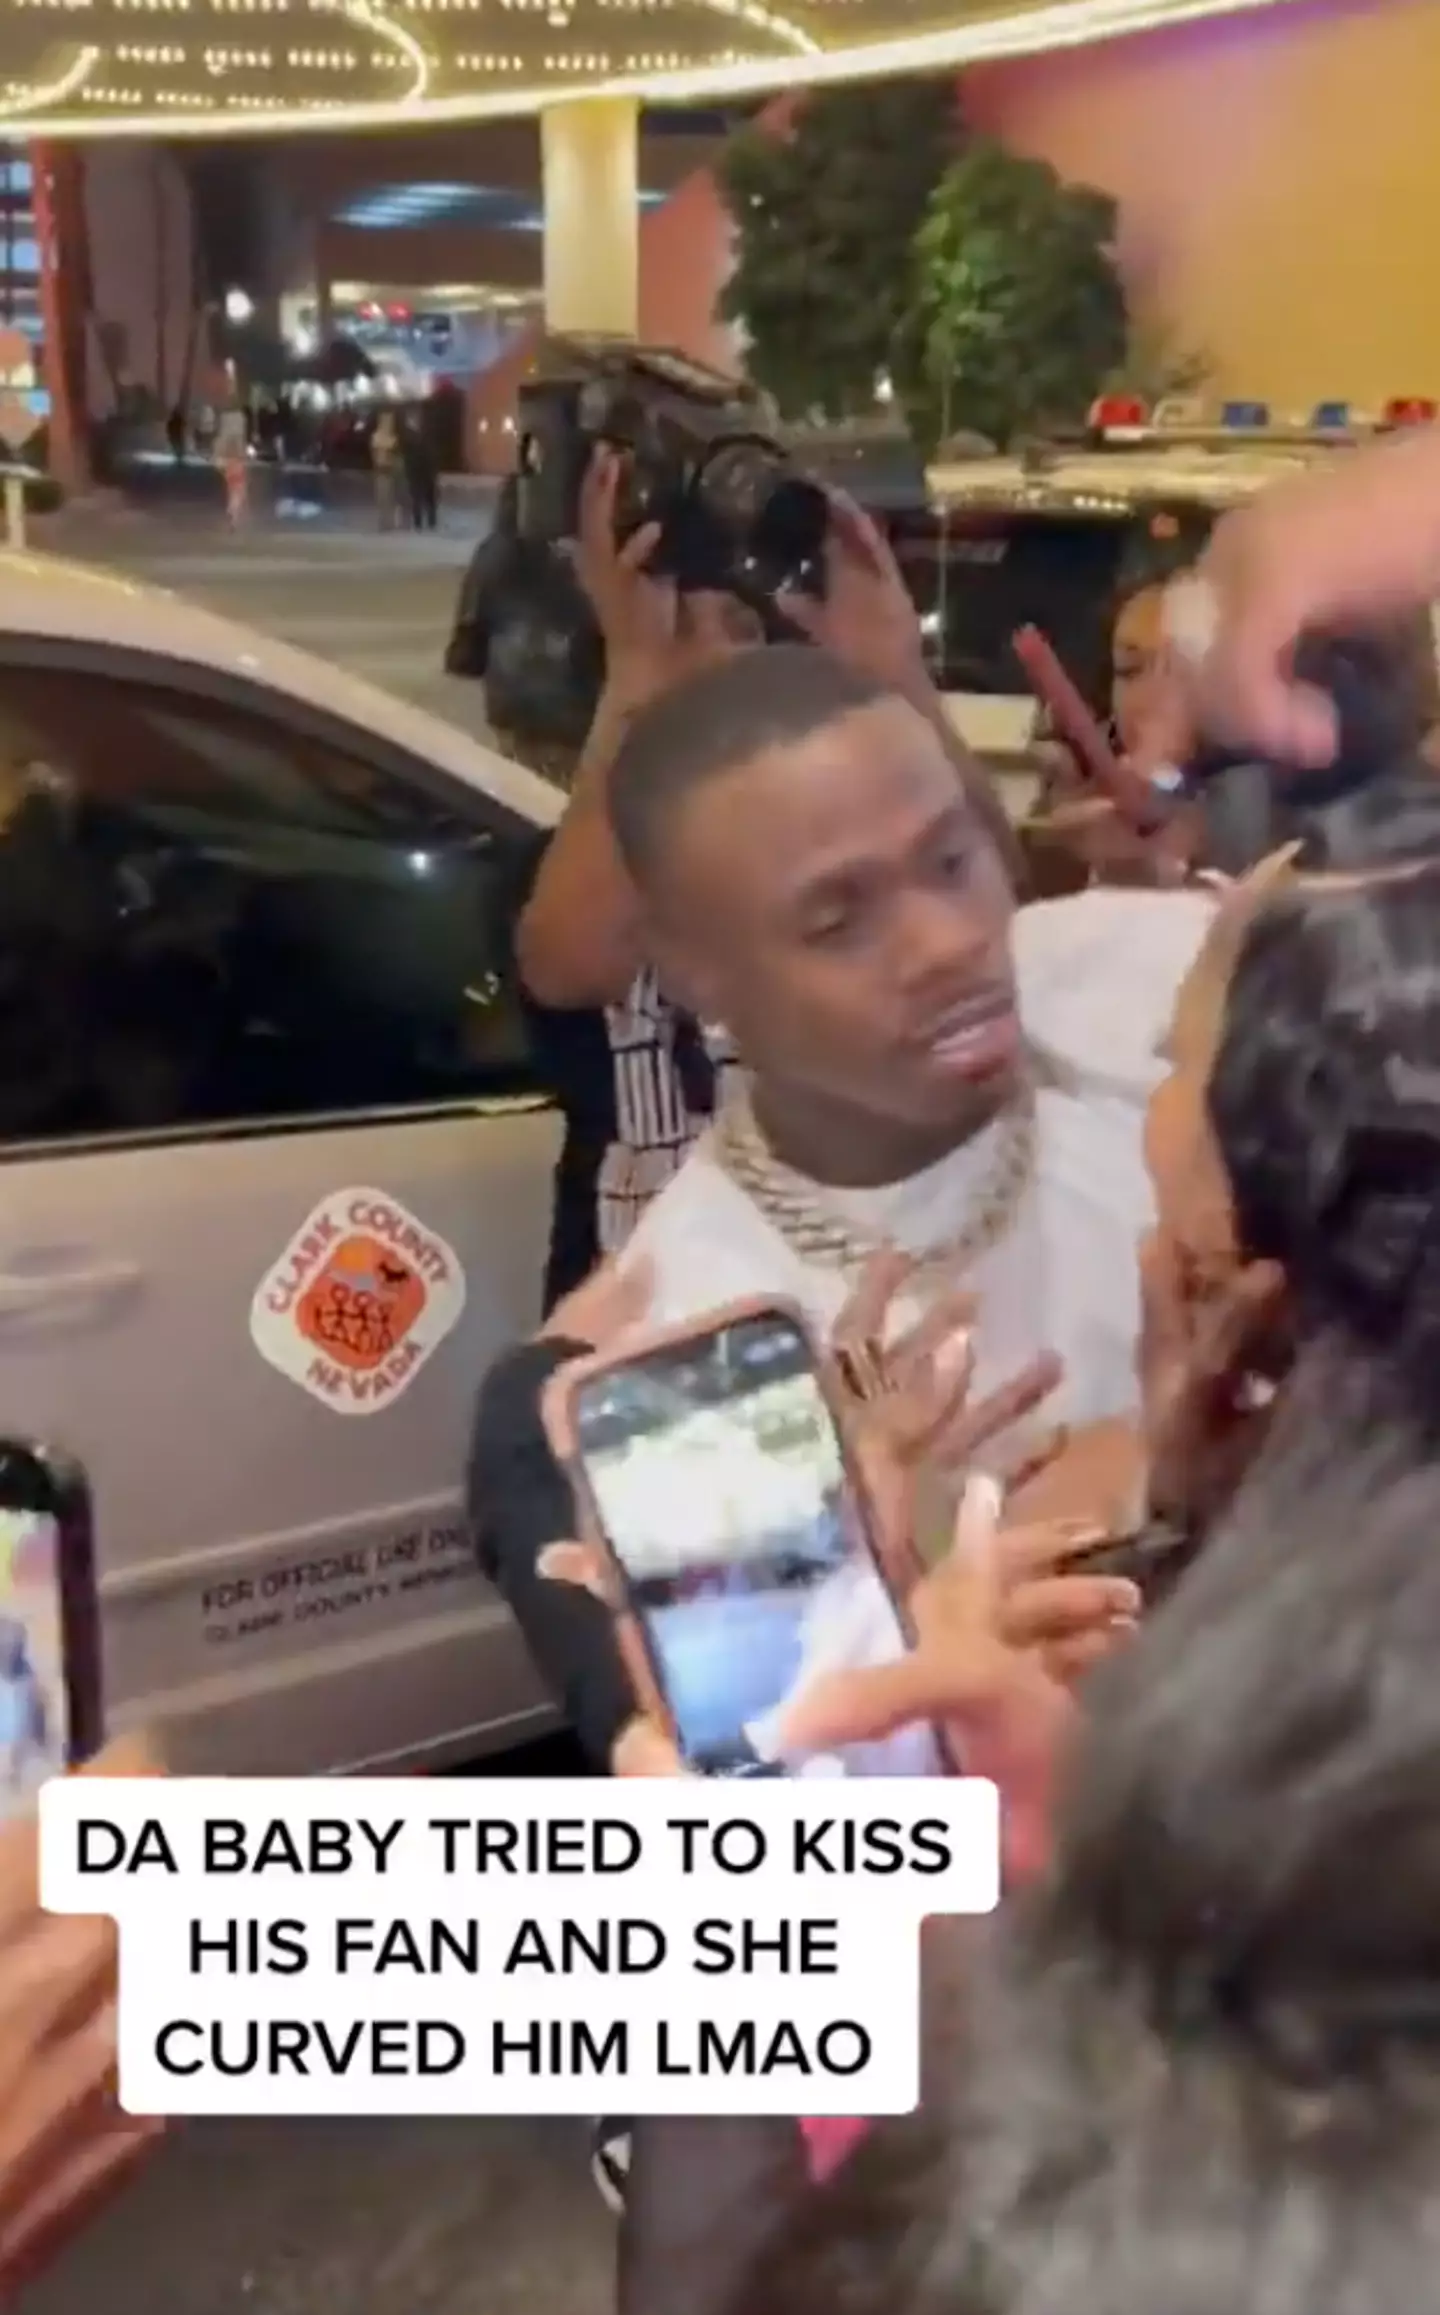 DaBaby has been accused of trying to forcibly kiss a fan in viral footage.